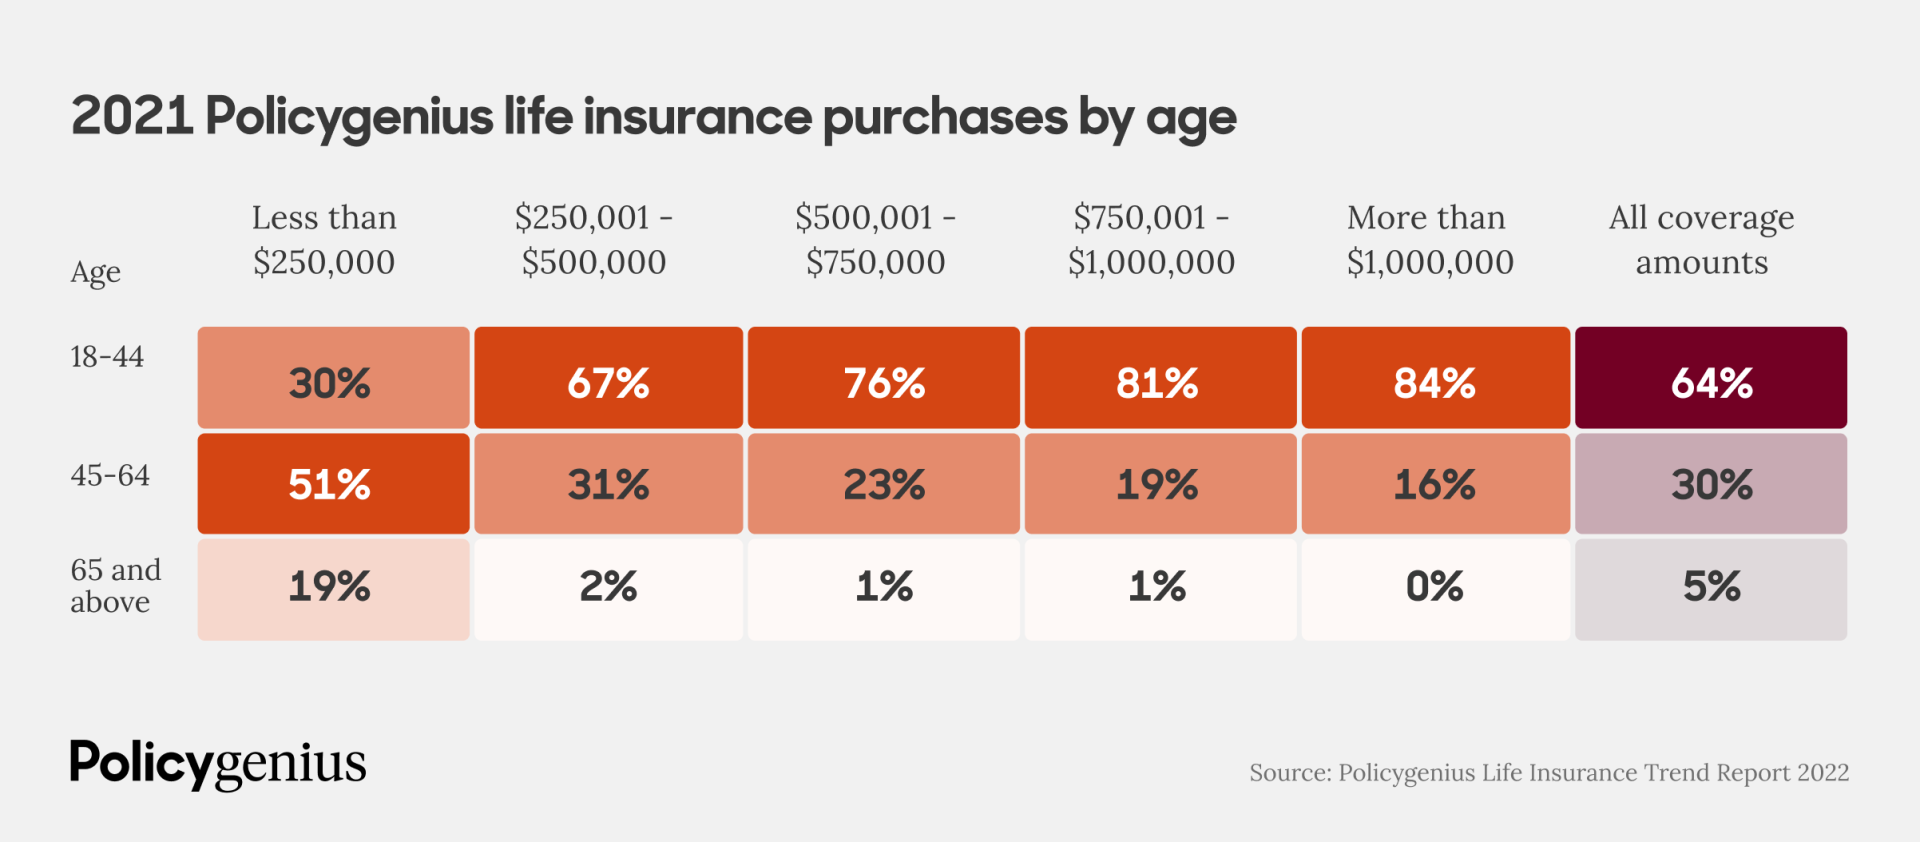 The 2022 Policygenius Life Insurance Trend Report